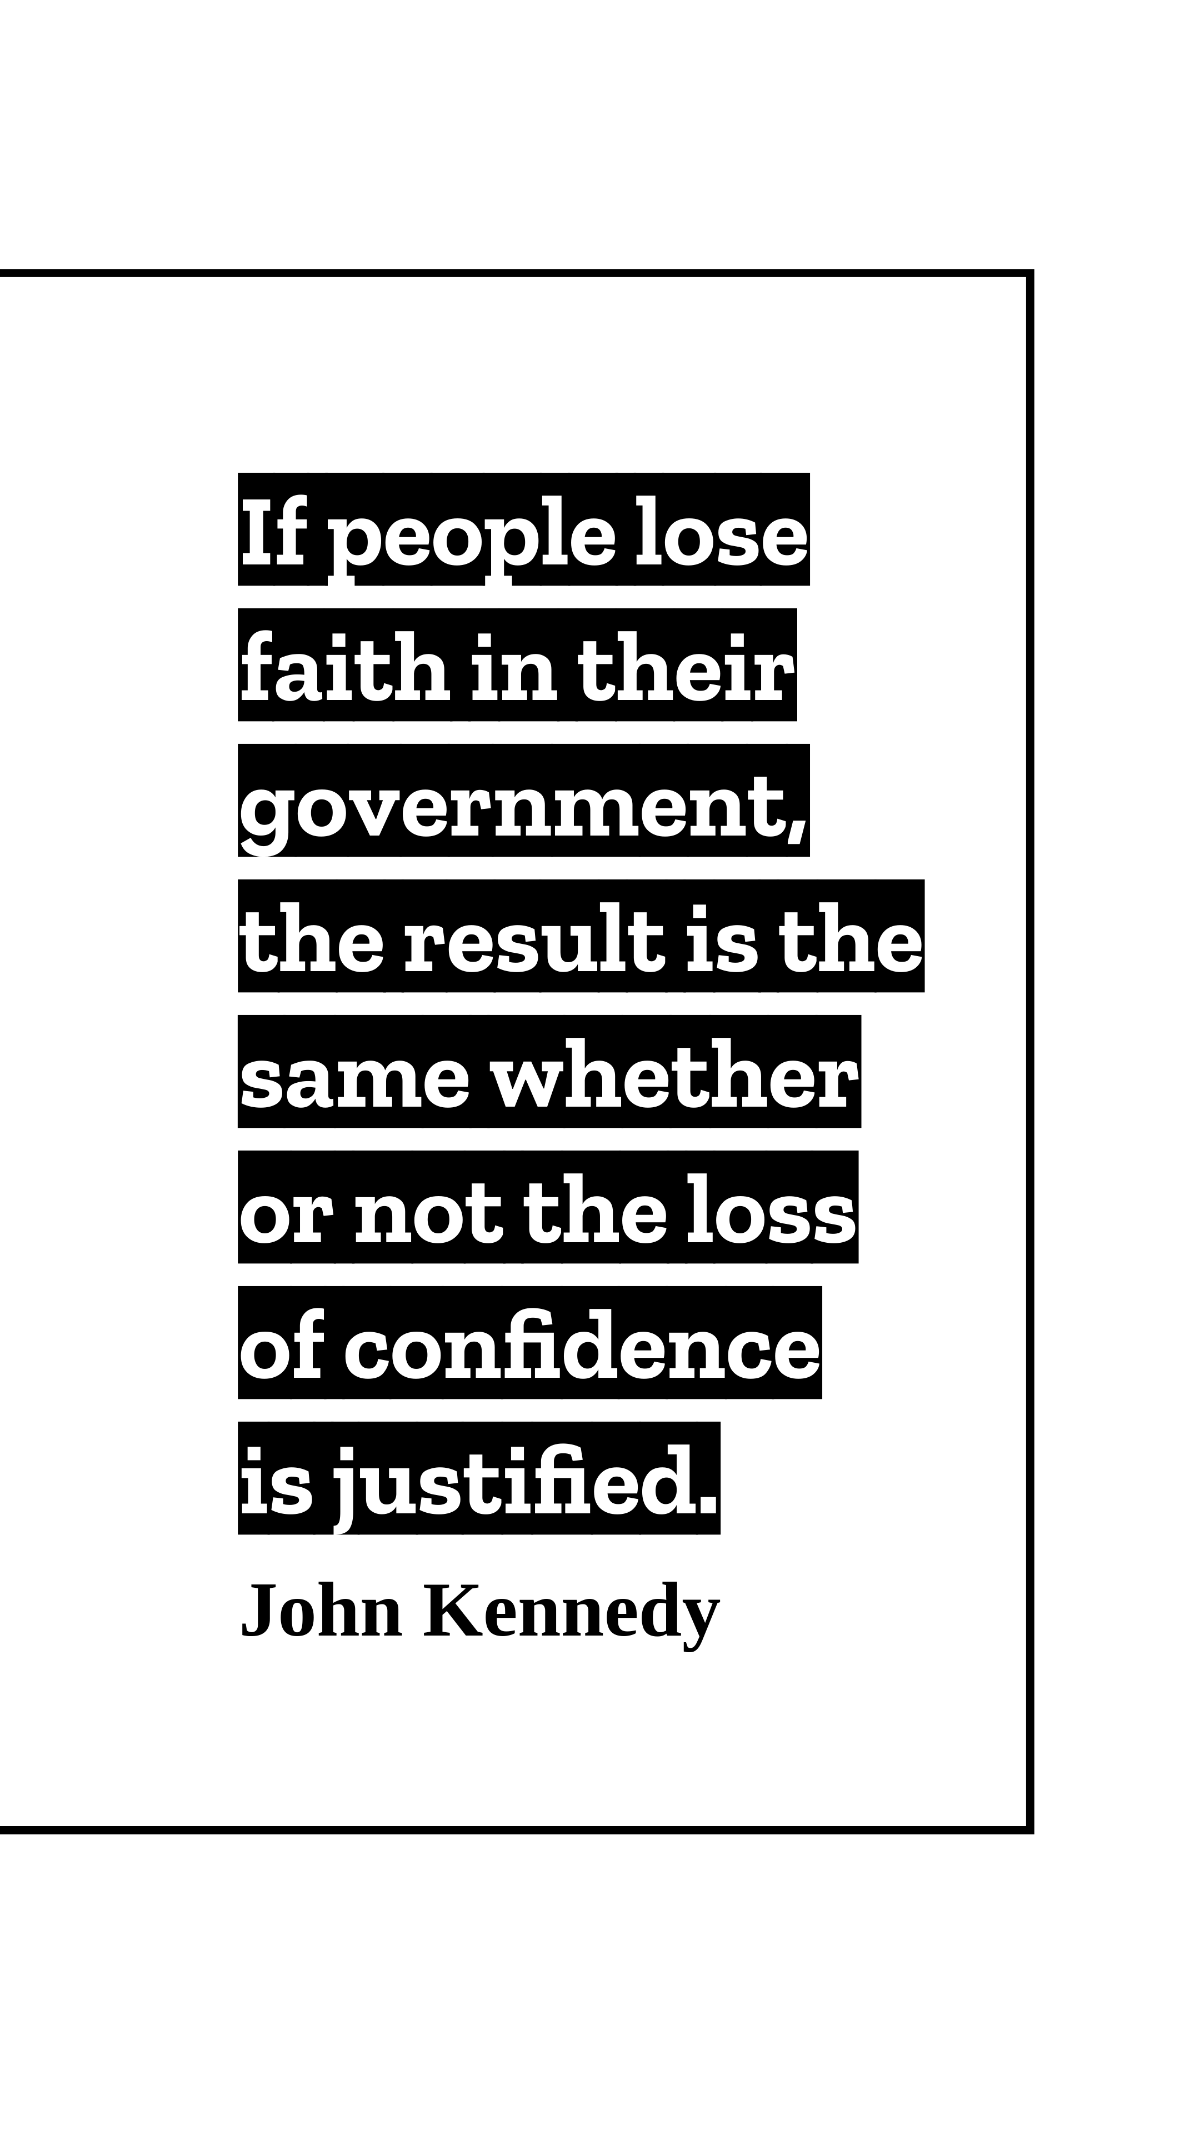 John Kennedy - If people lose faith in their government, the result is the same whether or not the loss of confidence is justified. Template